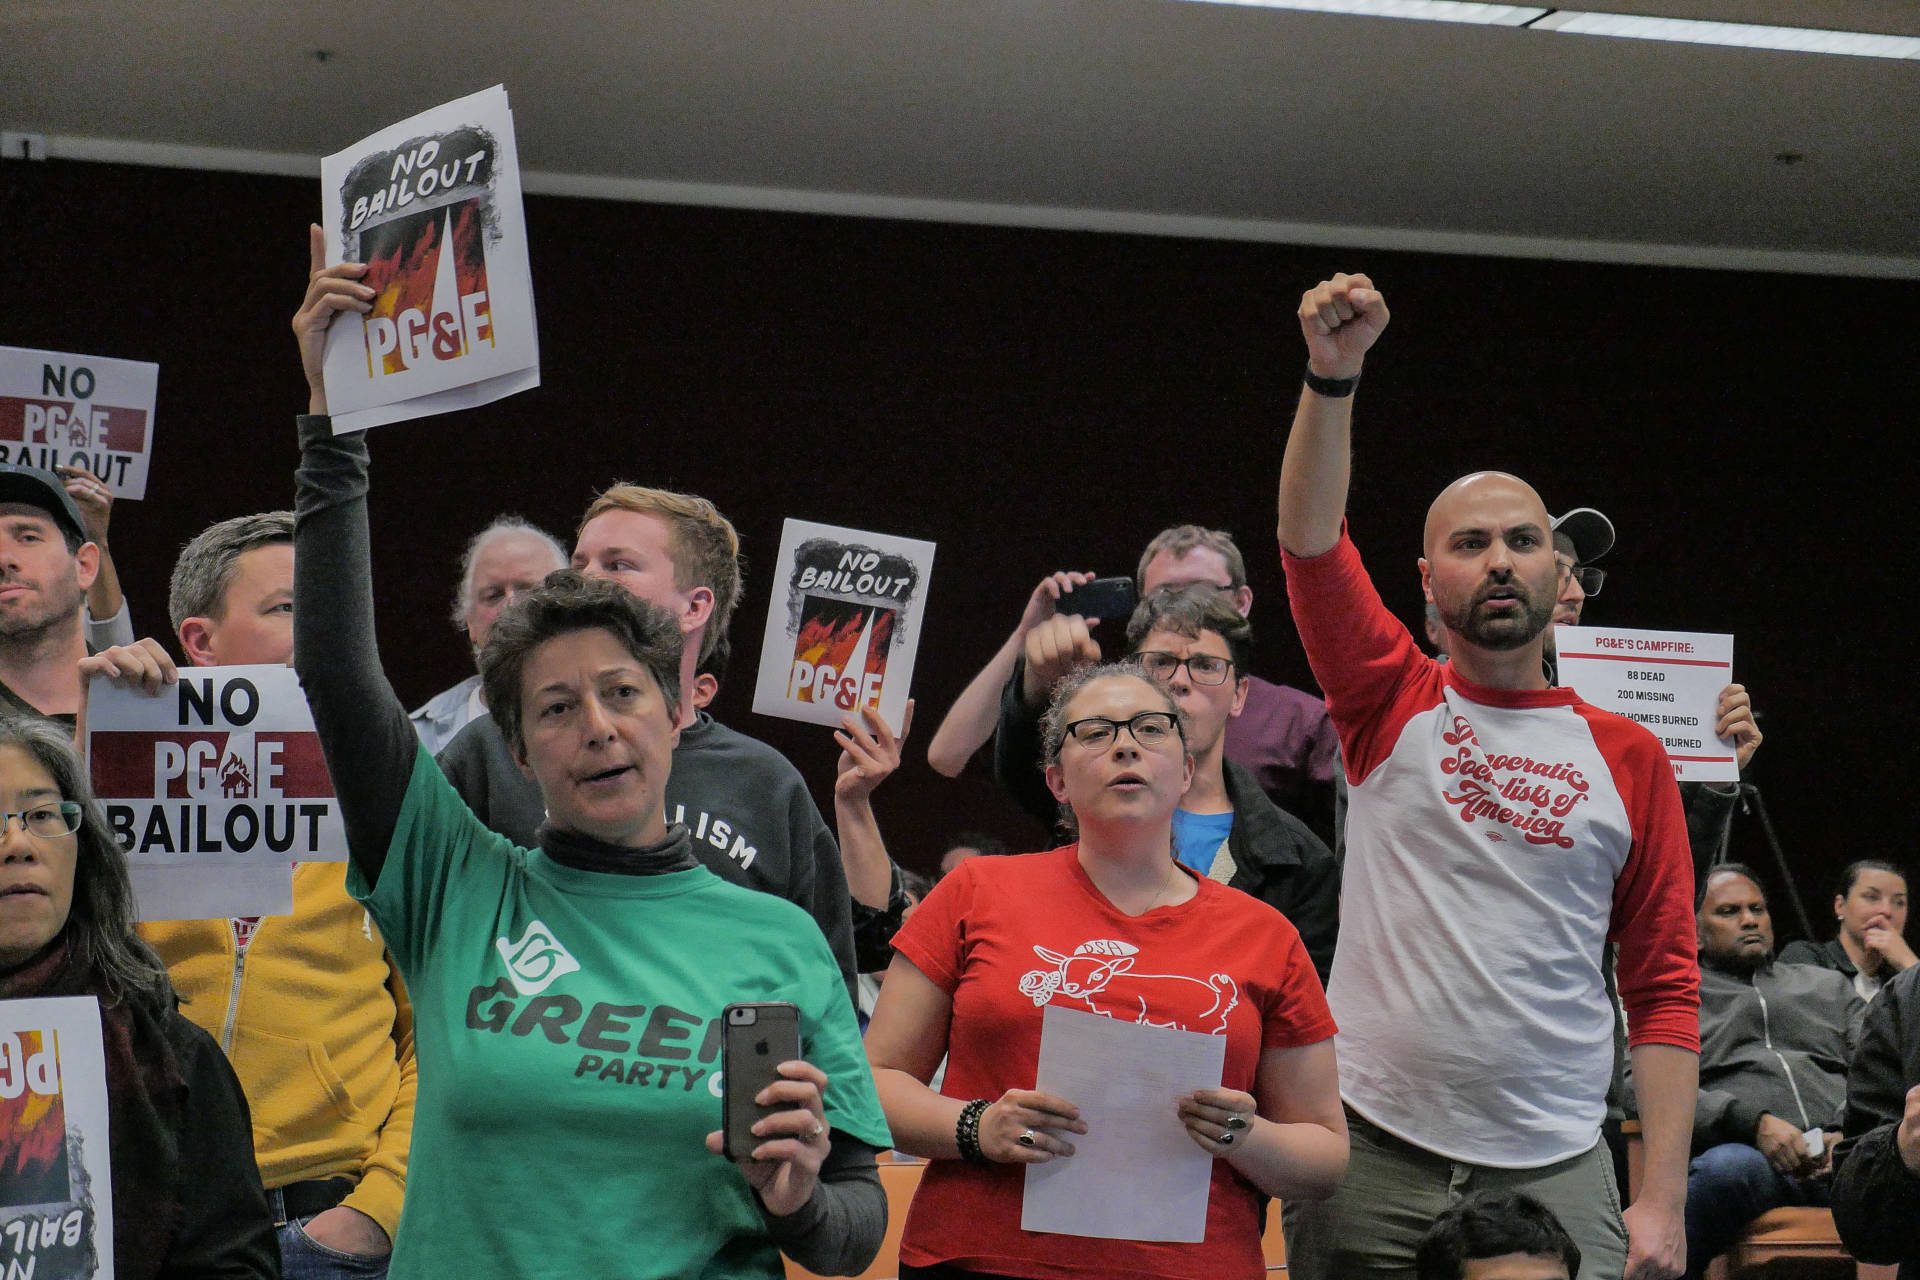 Activists from the No PG&amp;E Bailout coalition protest at the end of an emergency CPUC meeting on Jan. 28, 2019. Sheraz Sadiq/KQED